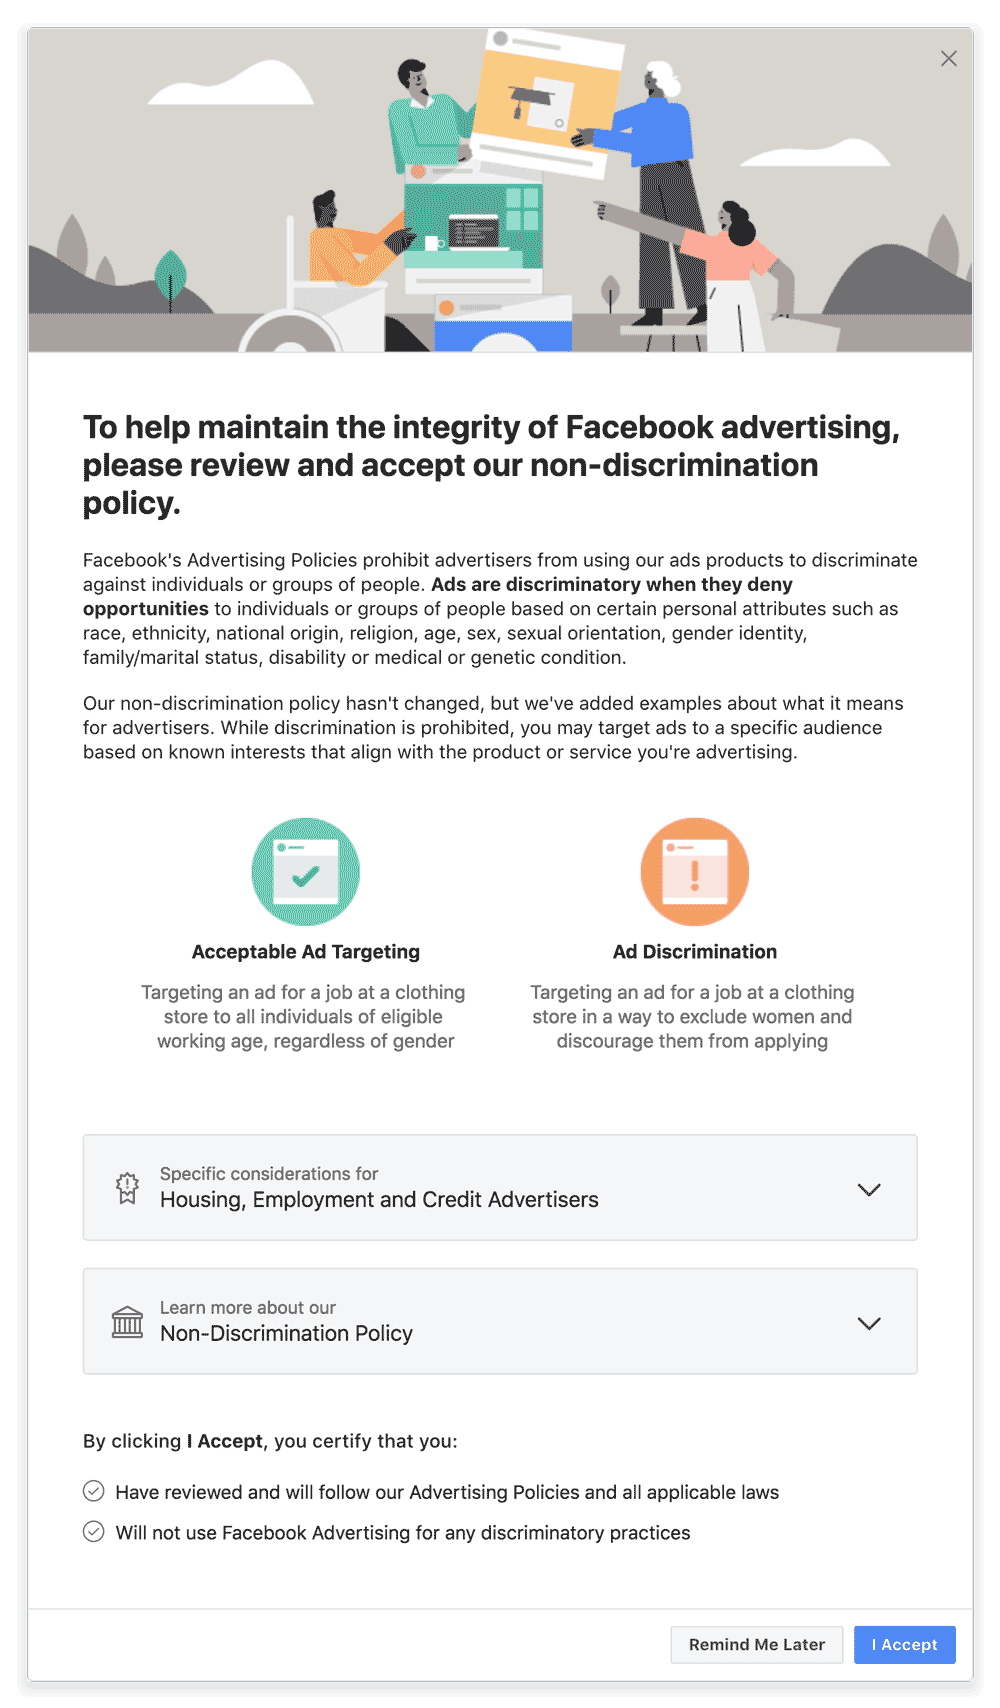 Facebook's Trust Ranking and The Removal of Advertising Targeting Options